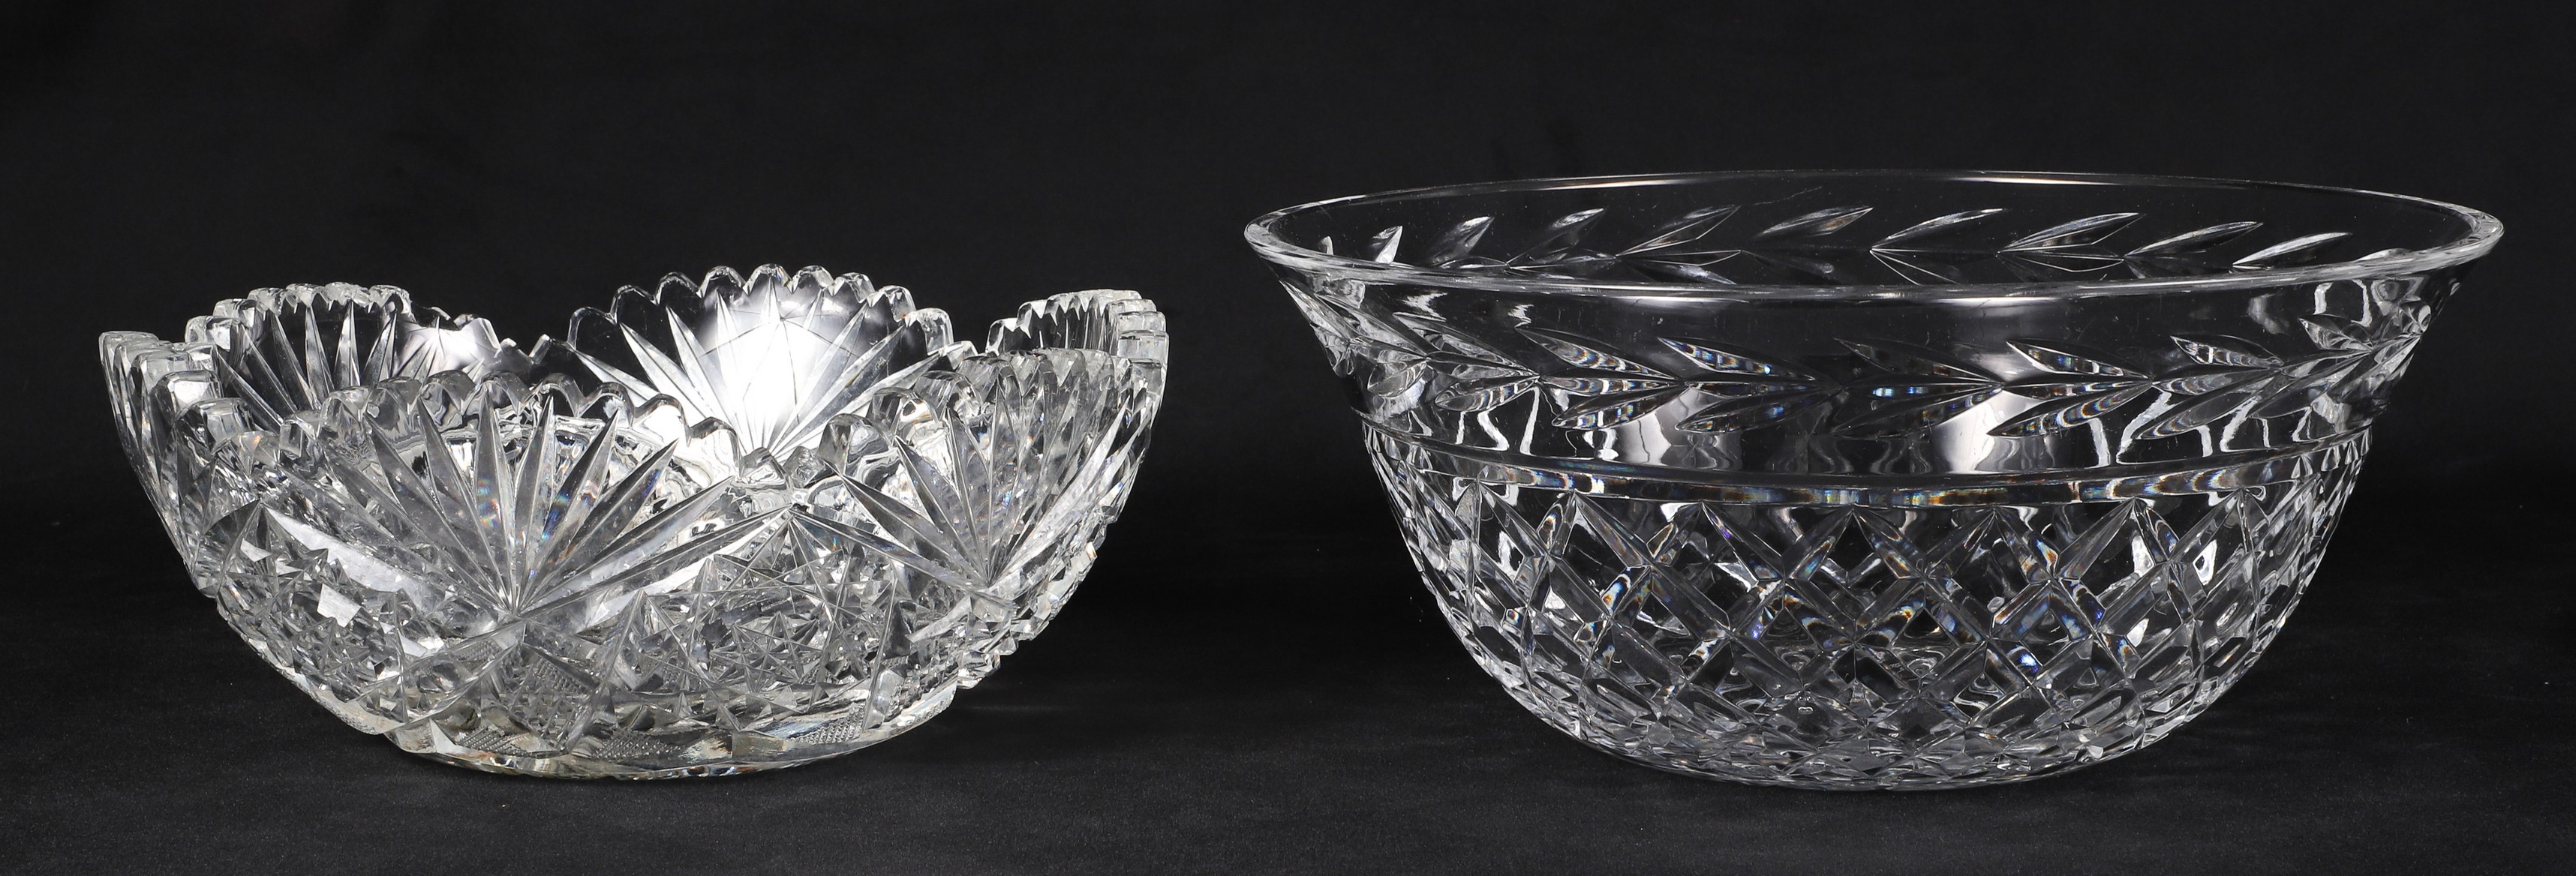  2 Crystal bowls c o Waterford 2e1333